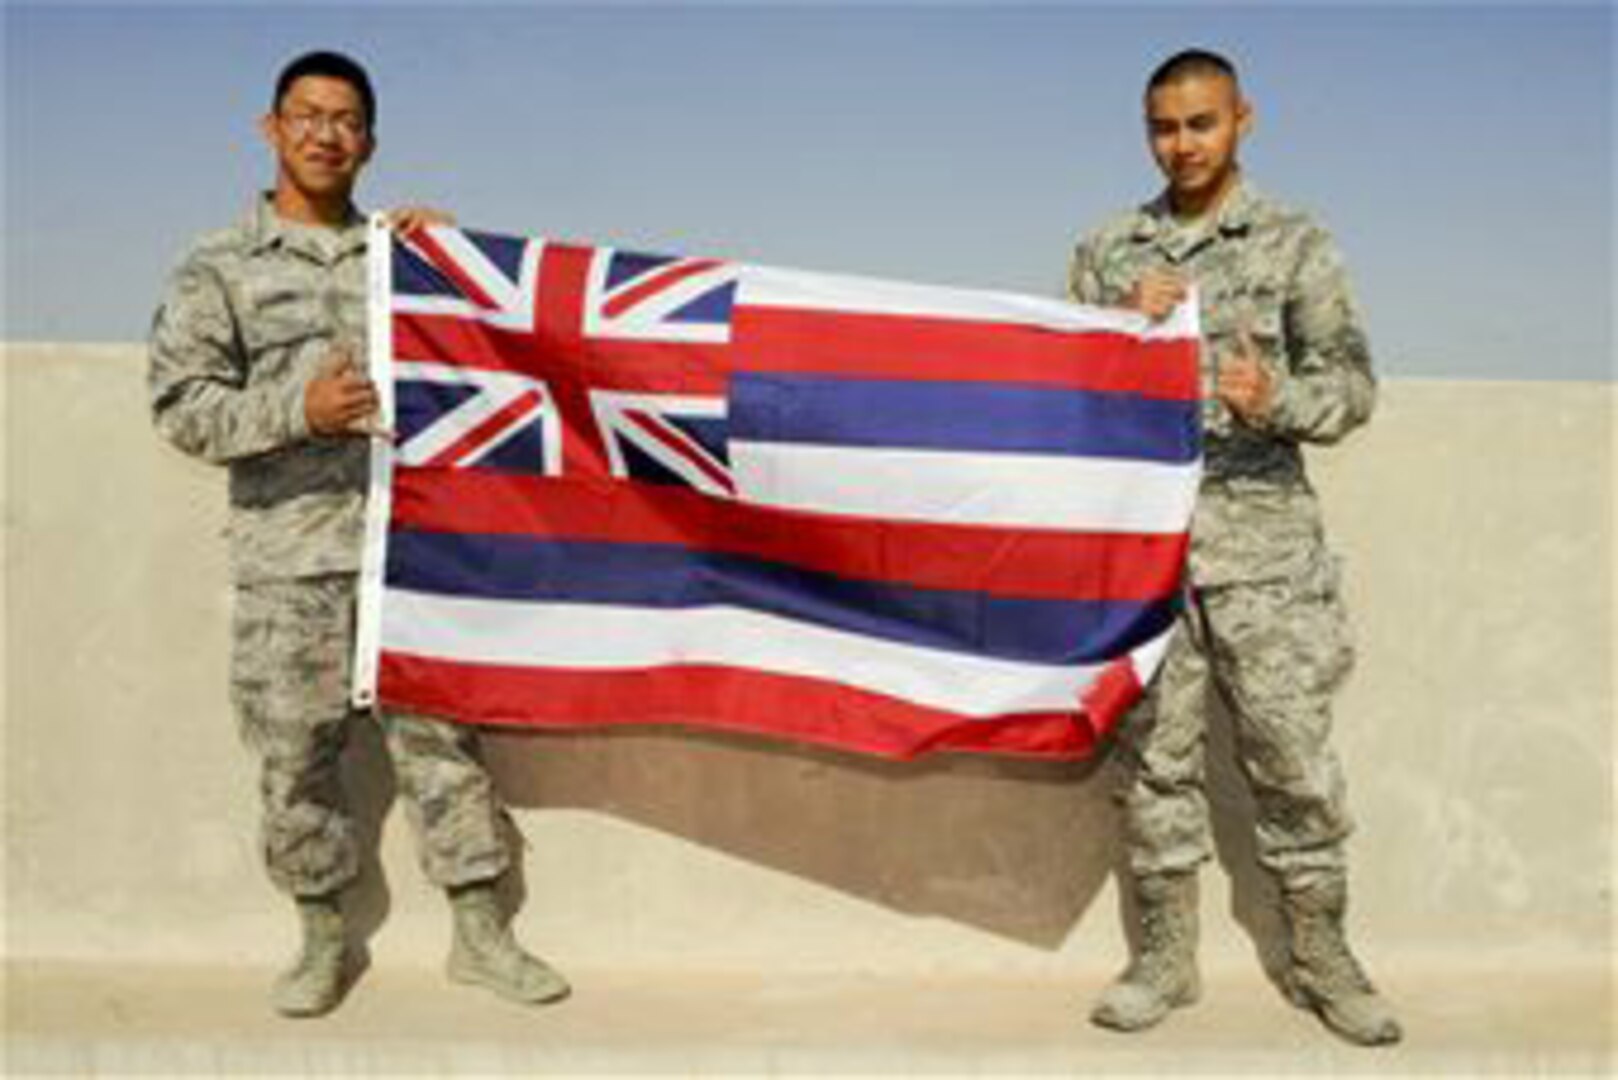 Senior Airman Ephesians Bagorio, and Airman 1st Class Kameron Combis, both from the 332nd Expeditionary Communications Squadron, hold the Hawaiian state flag at an undisclosed location in Southwest Asia, Jan. 20, 2012. Bagorio and Combis graduated together from Barber's Point Campus of the Hawaii National Guard's Youth Challenge Academy. The academy is a program that helps misguided youth to become a working part of the community. Bagorio is deployed from Davis-Monthan Air Force Base, Ariz., and Combis is deployed from the Hawaii Air National Guard. Both are natives of the state of Hawaii.